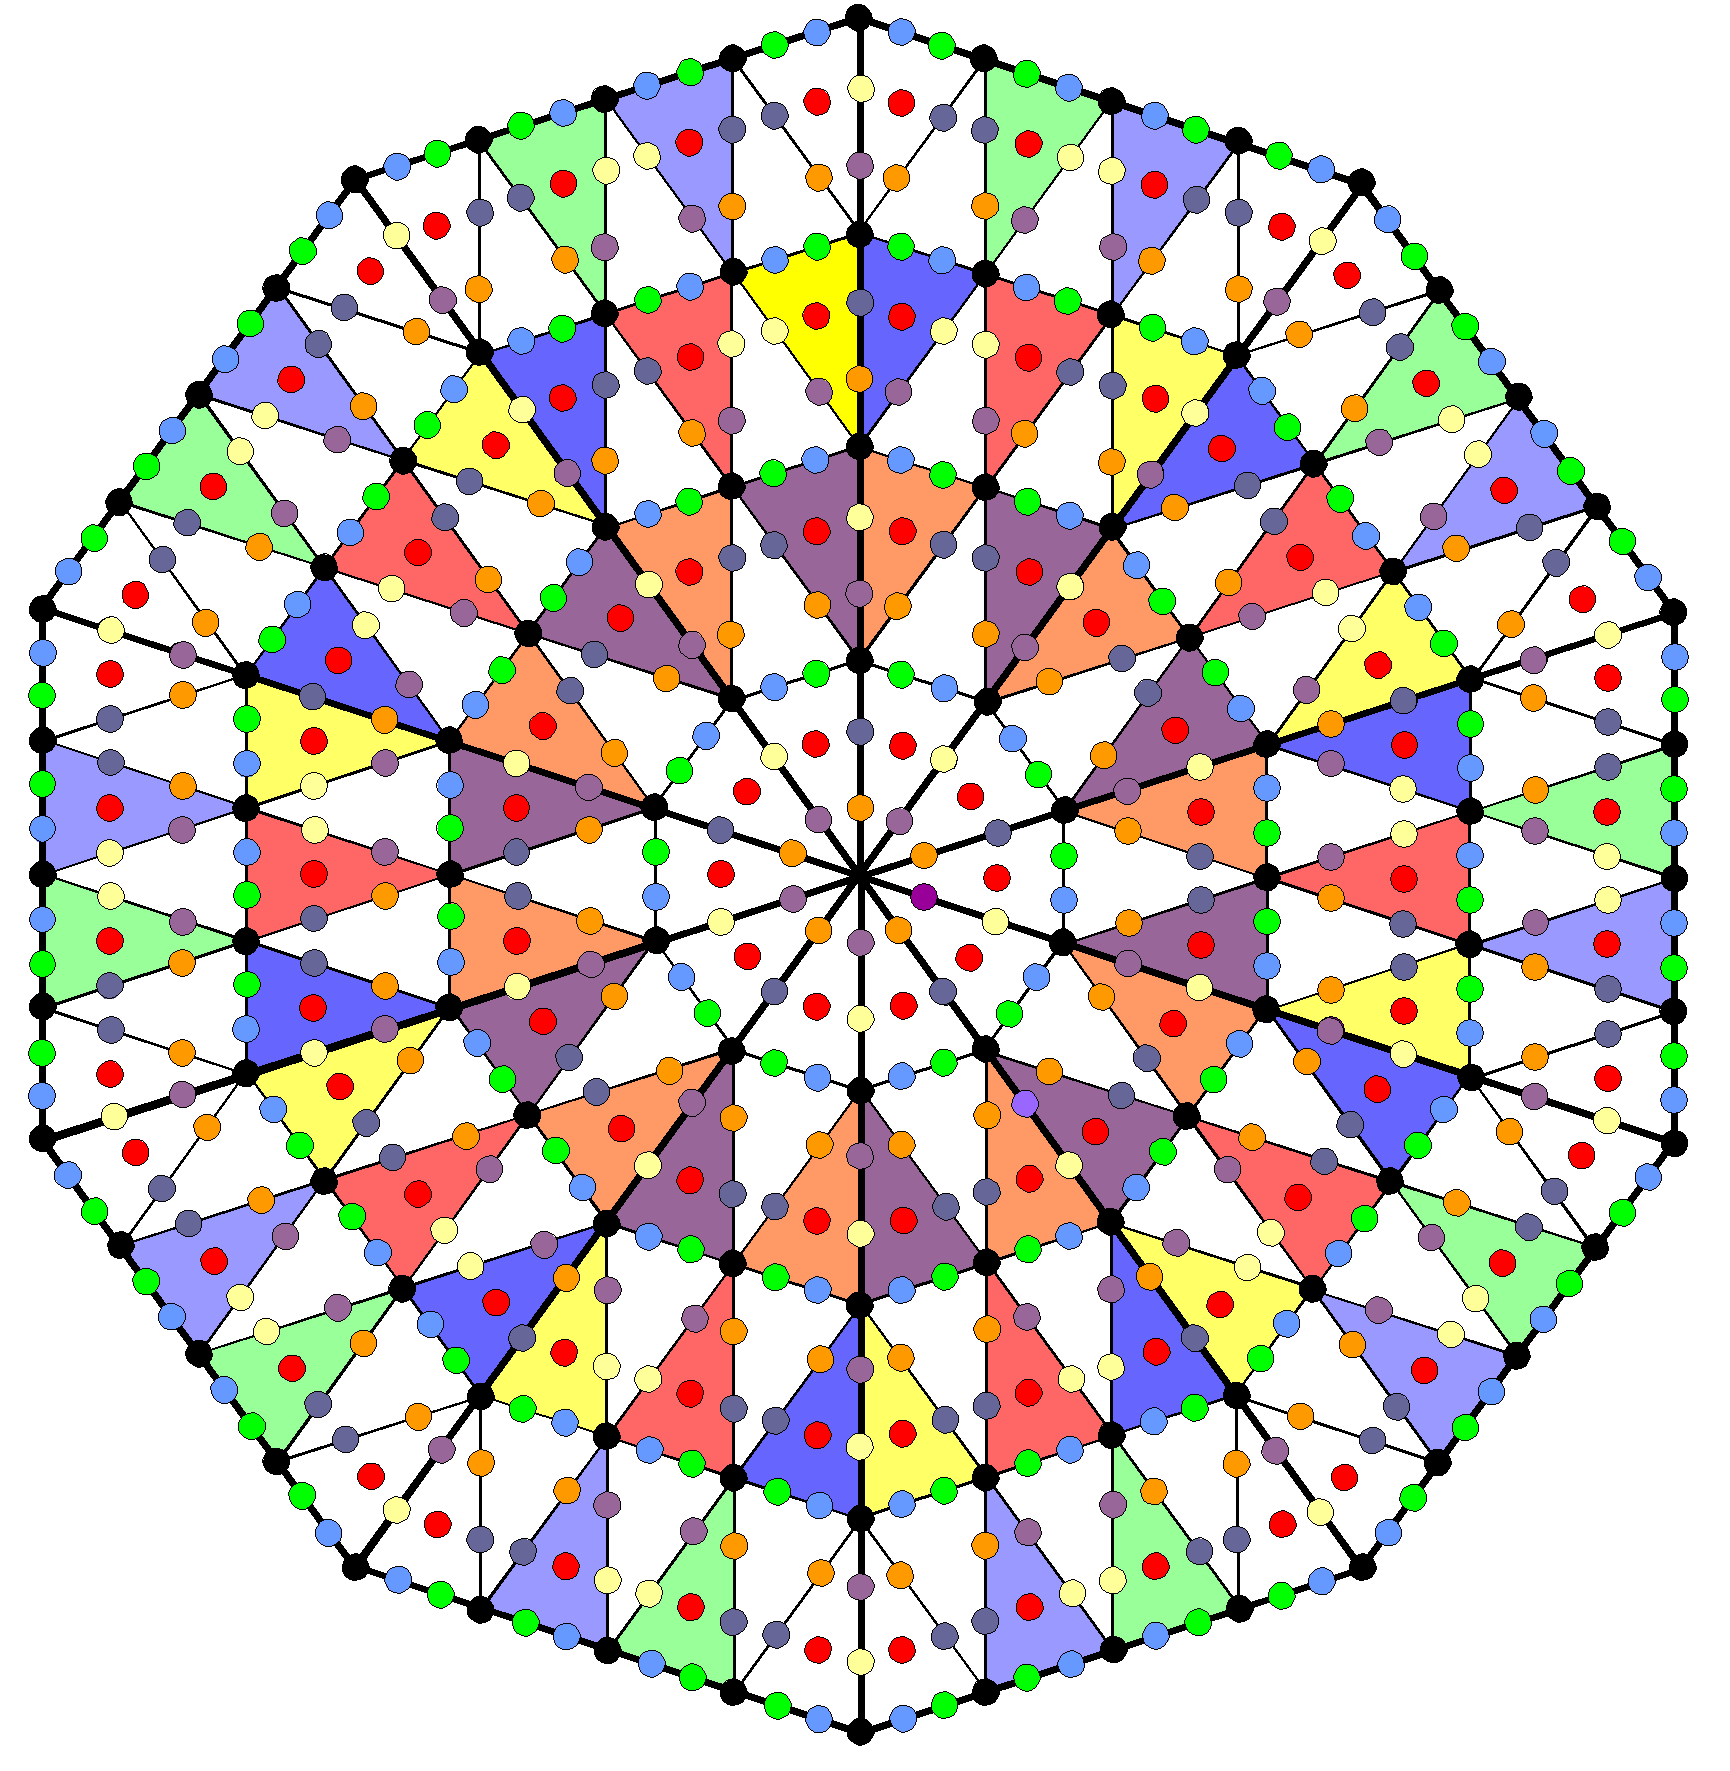 720 yods surround centre of decagon